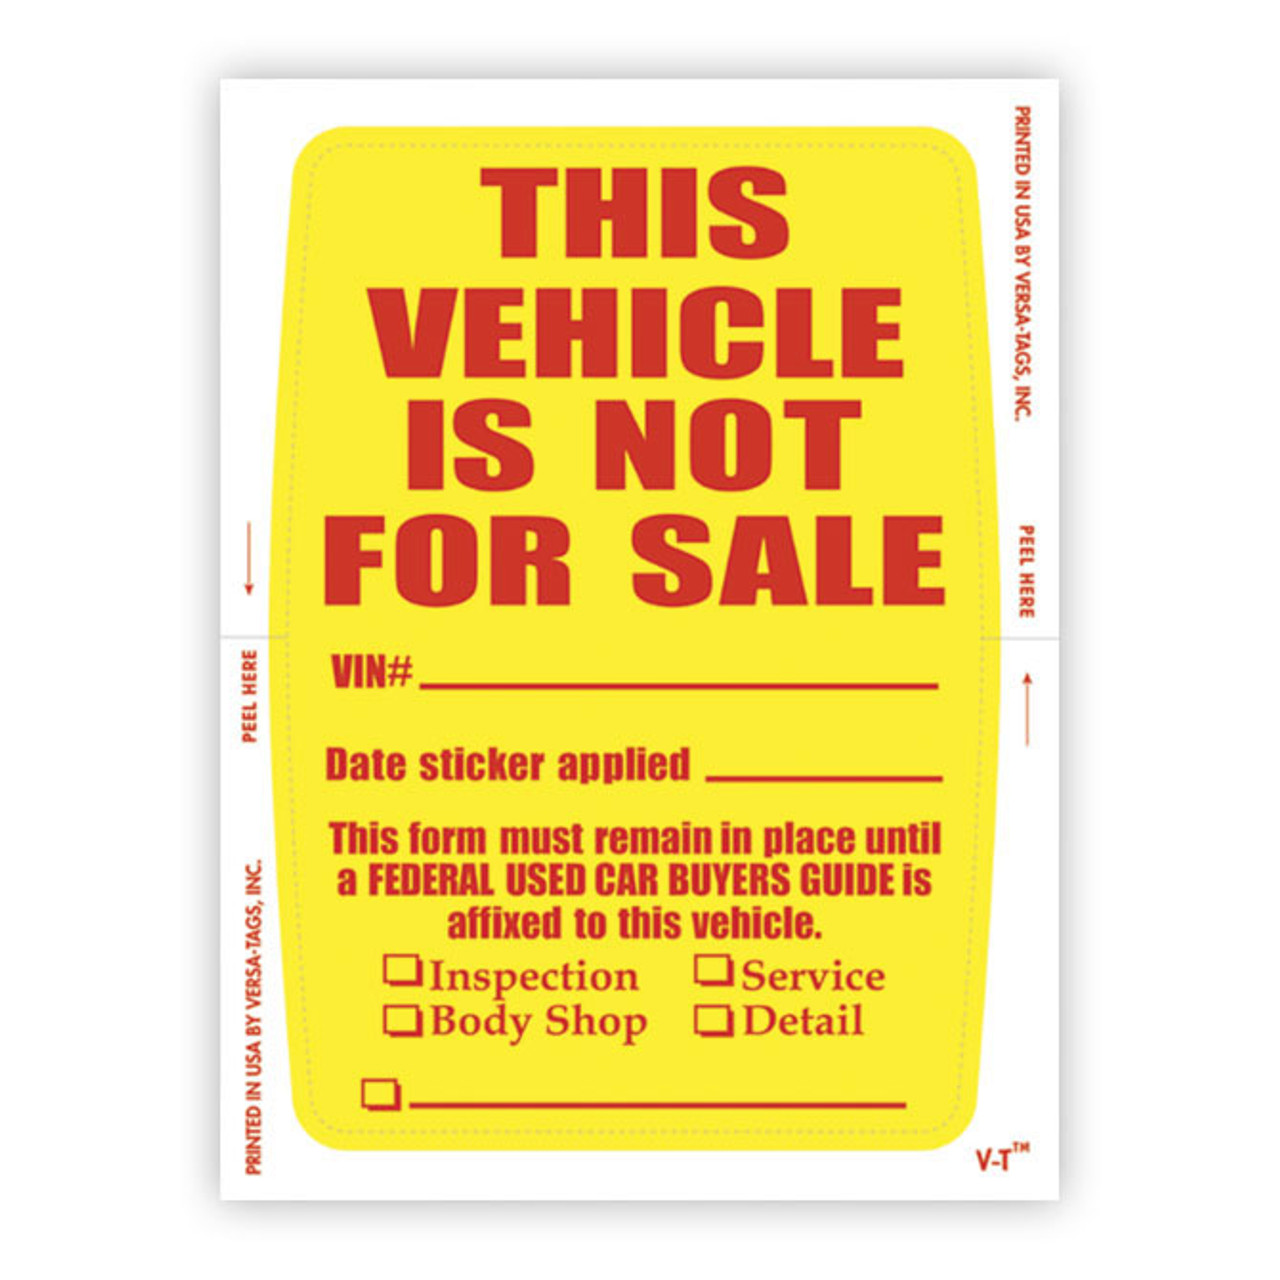 Vehicle Not For Sale Sticker (Face Stick), 4-1/2? x 6, 250 Per Pack